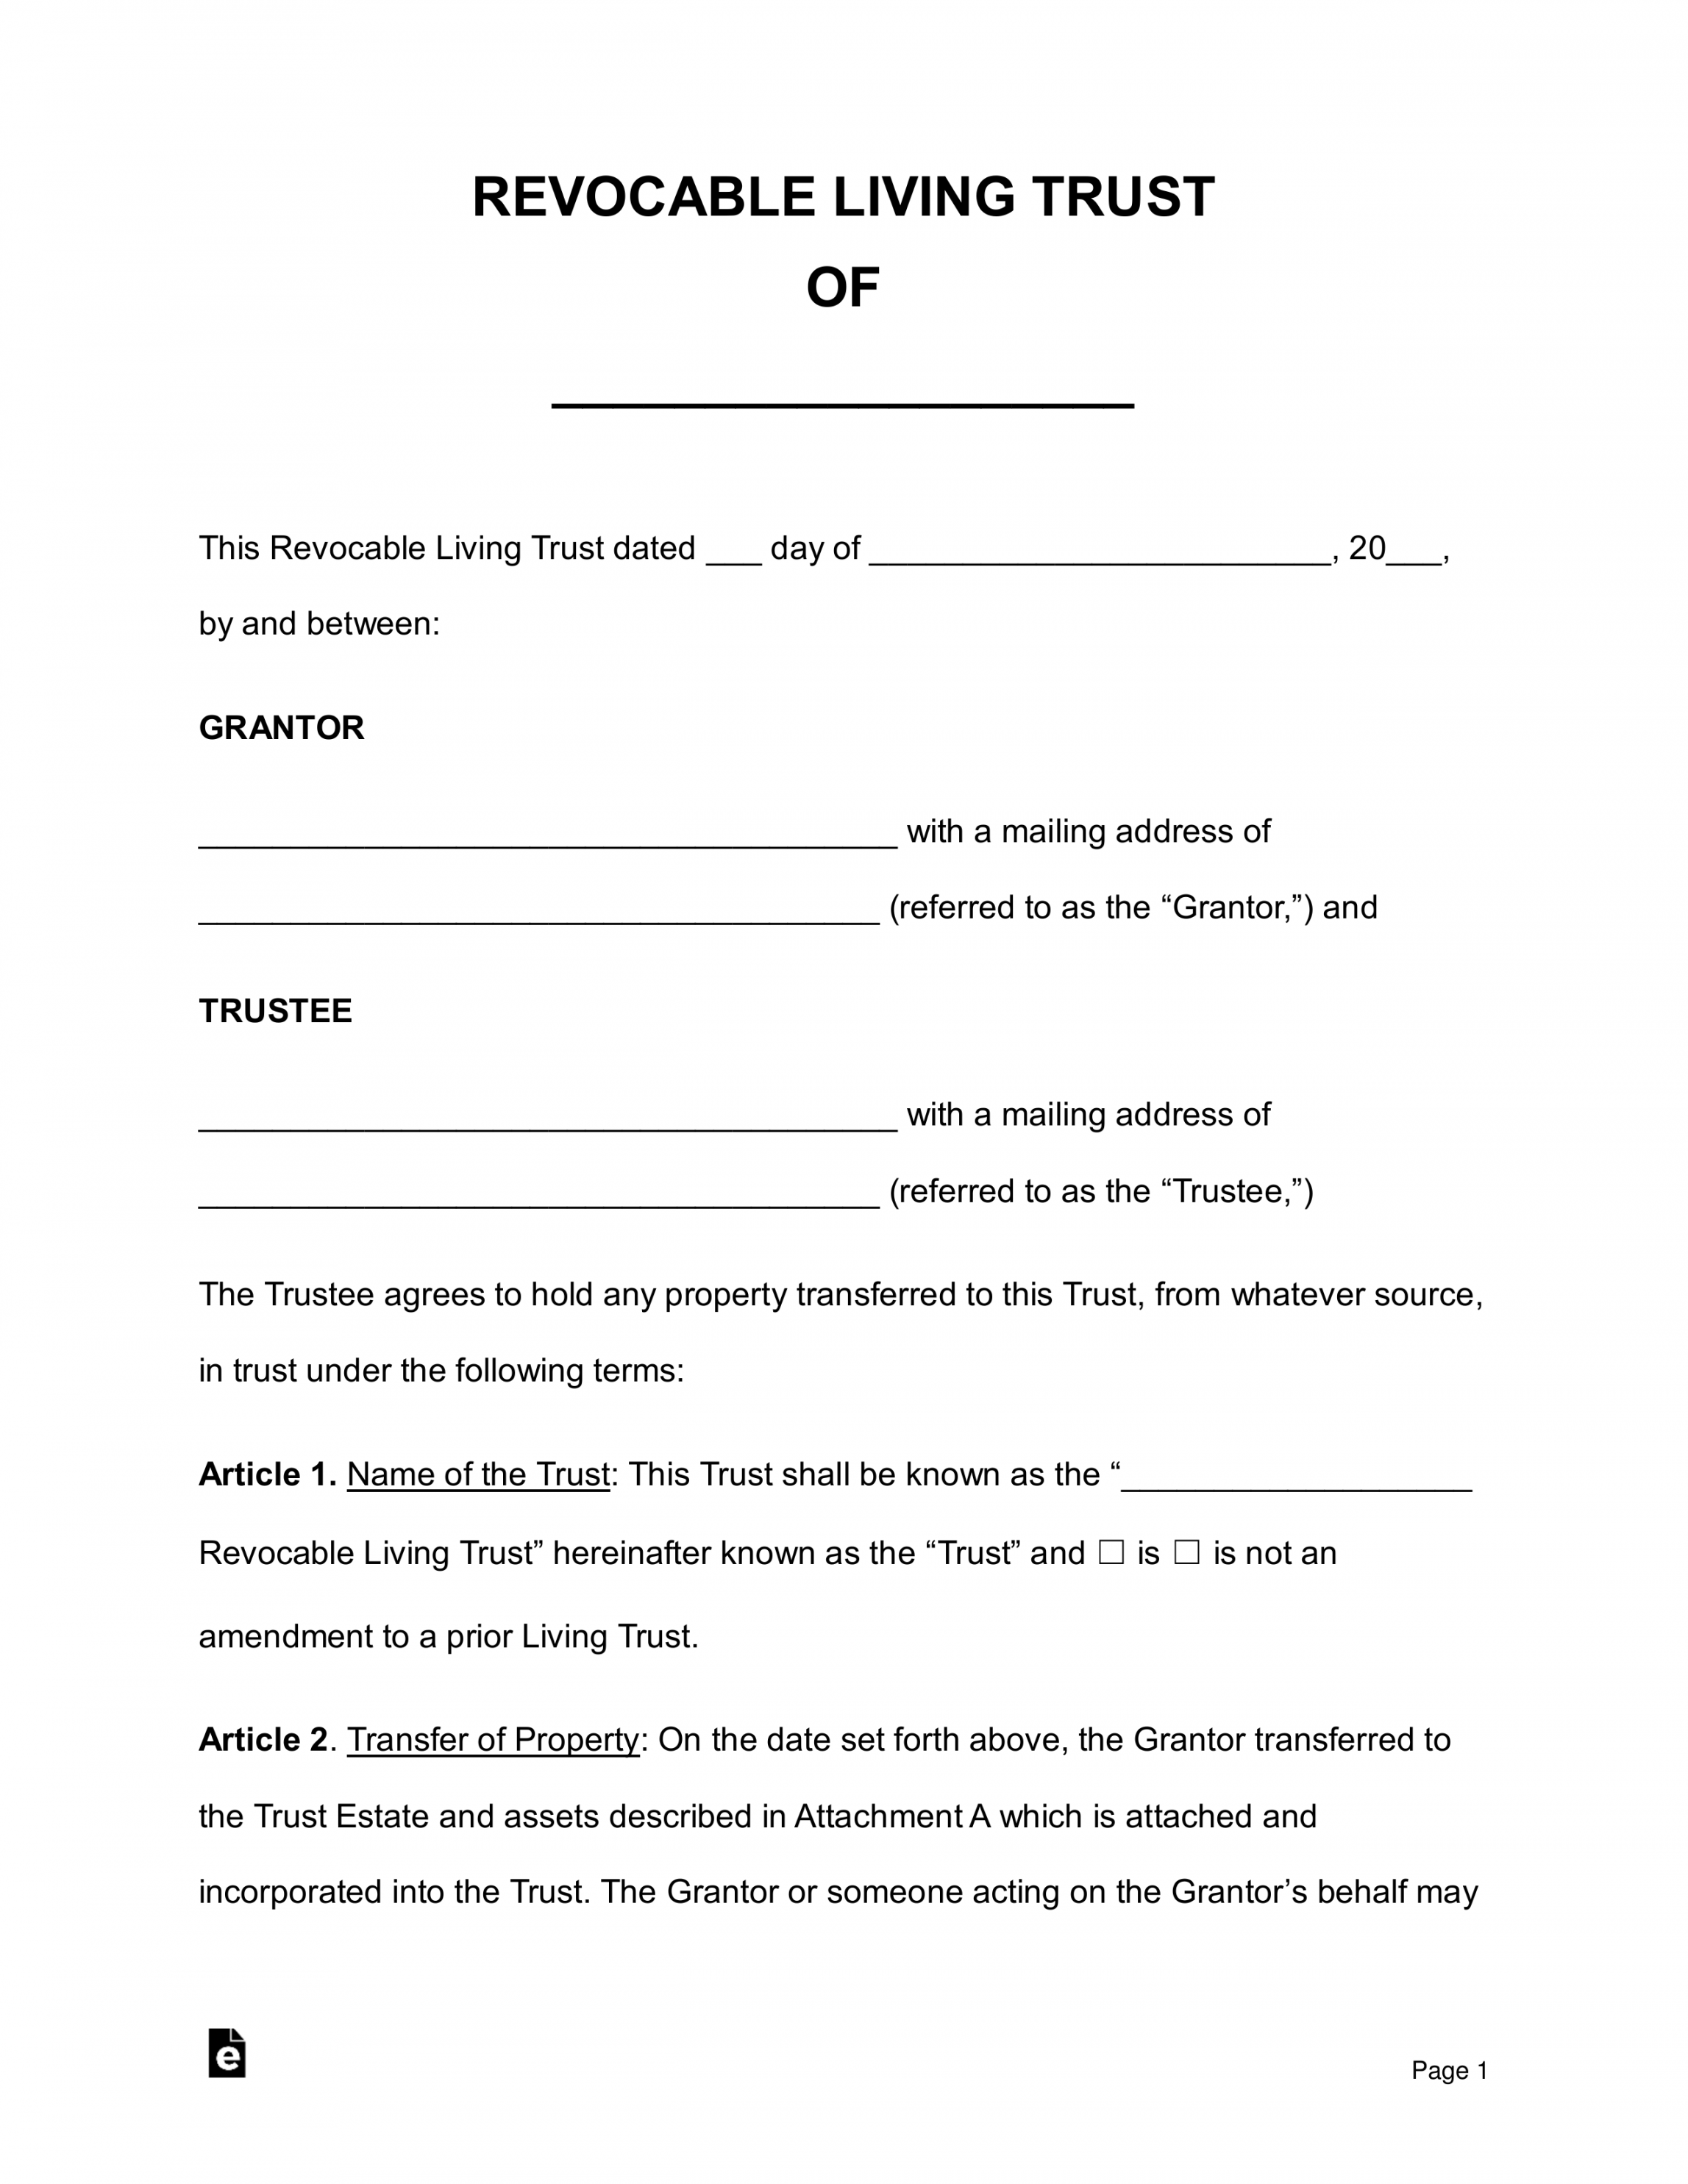 Free Revocable Living Trust Forms - PDF  Word – eForms - FREE Printables - Free Printable Trust Forms